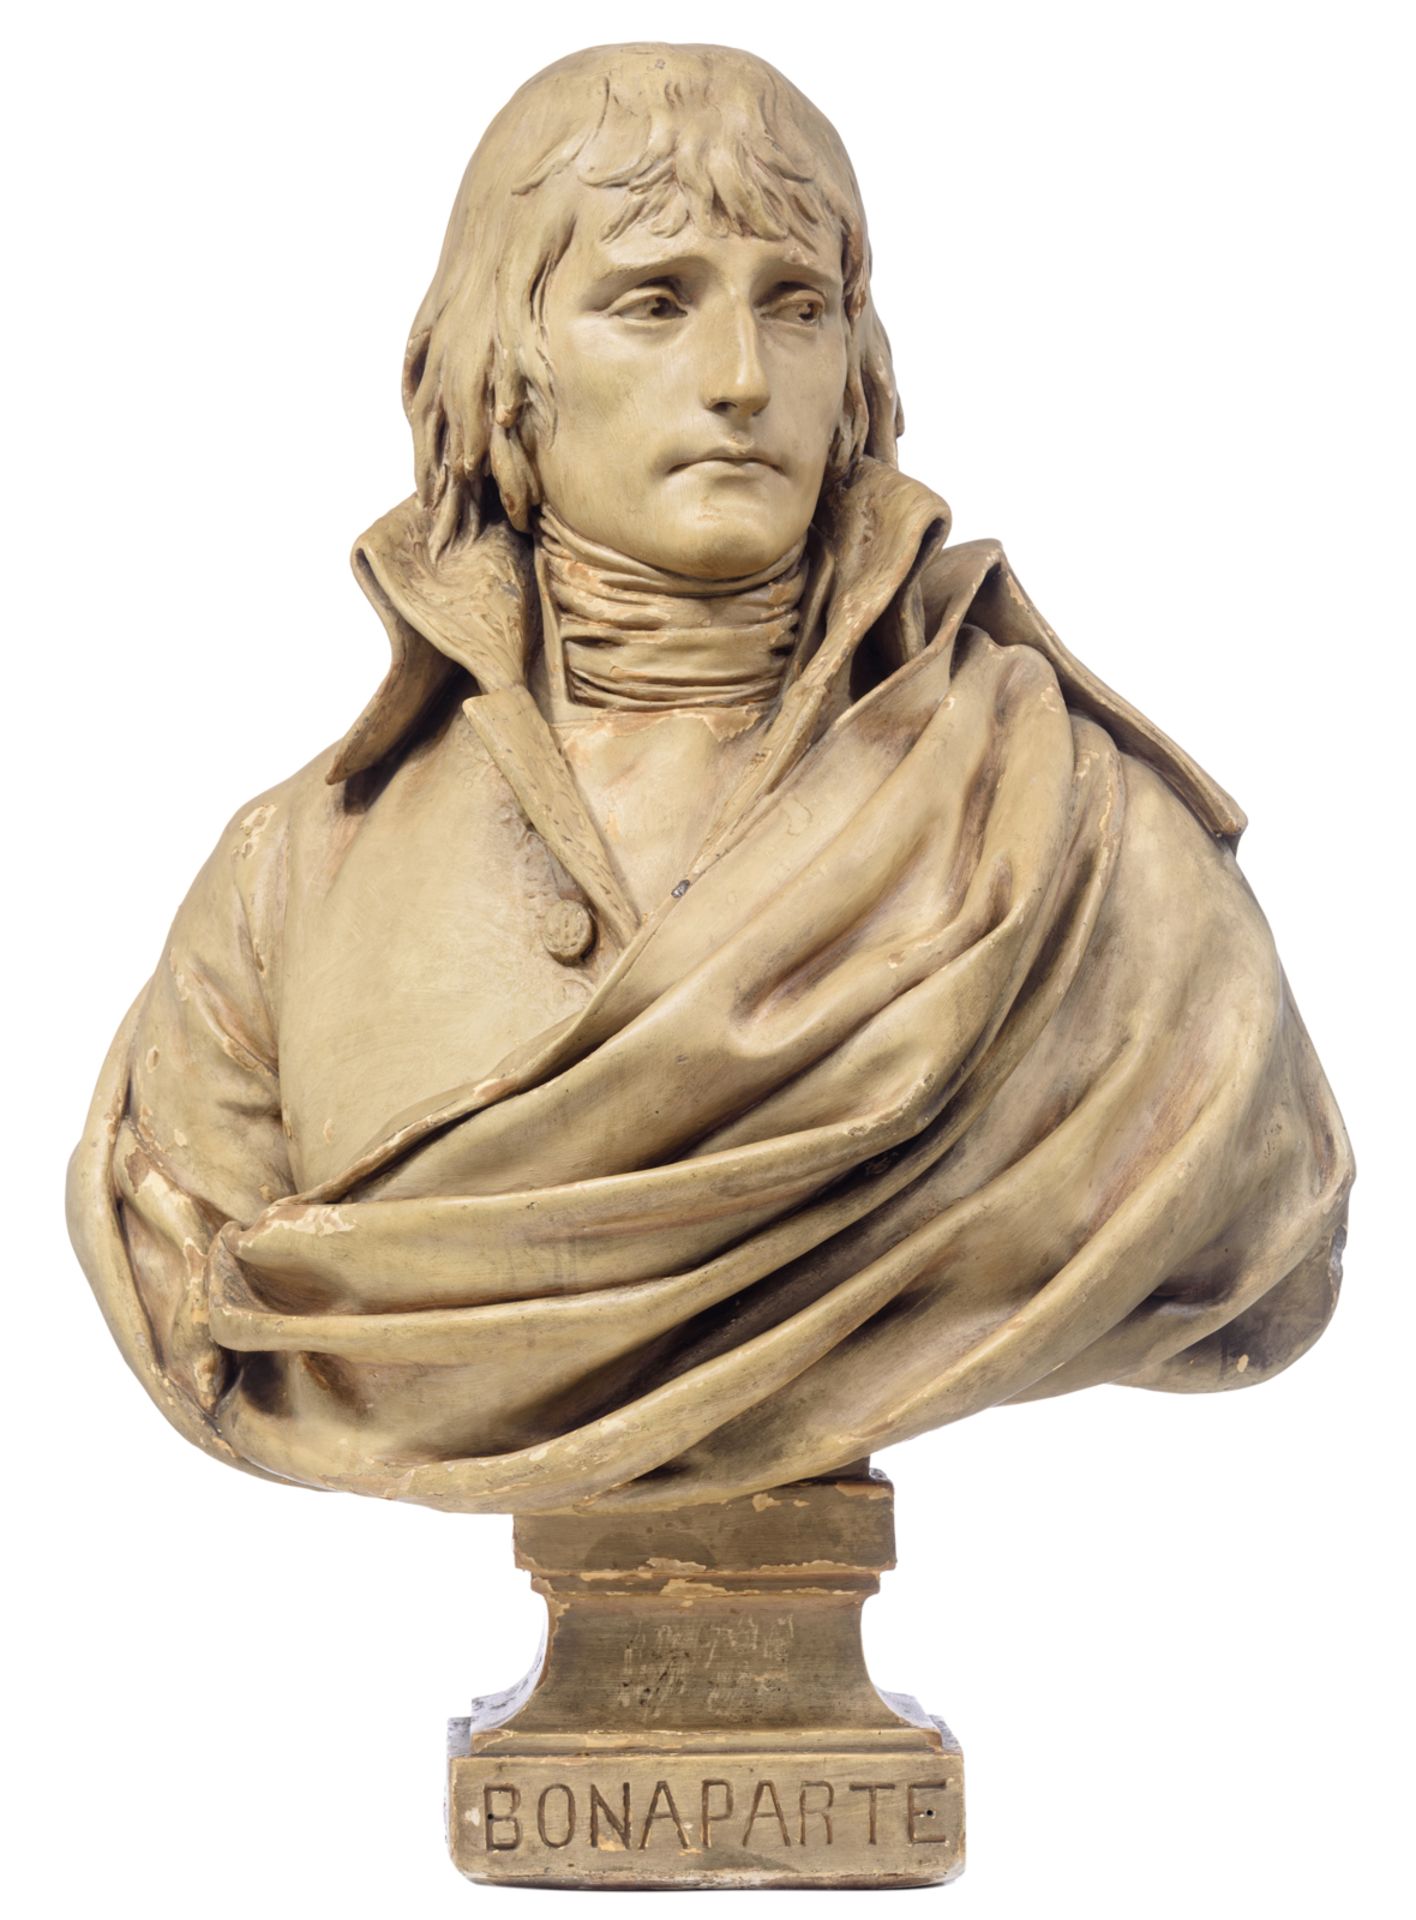 An imposing bust of the young Napoléon Bonaparte as a general after Charles Louis Corbet, patinated